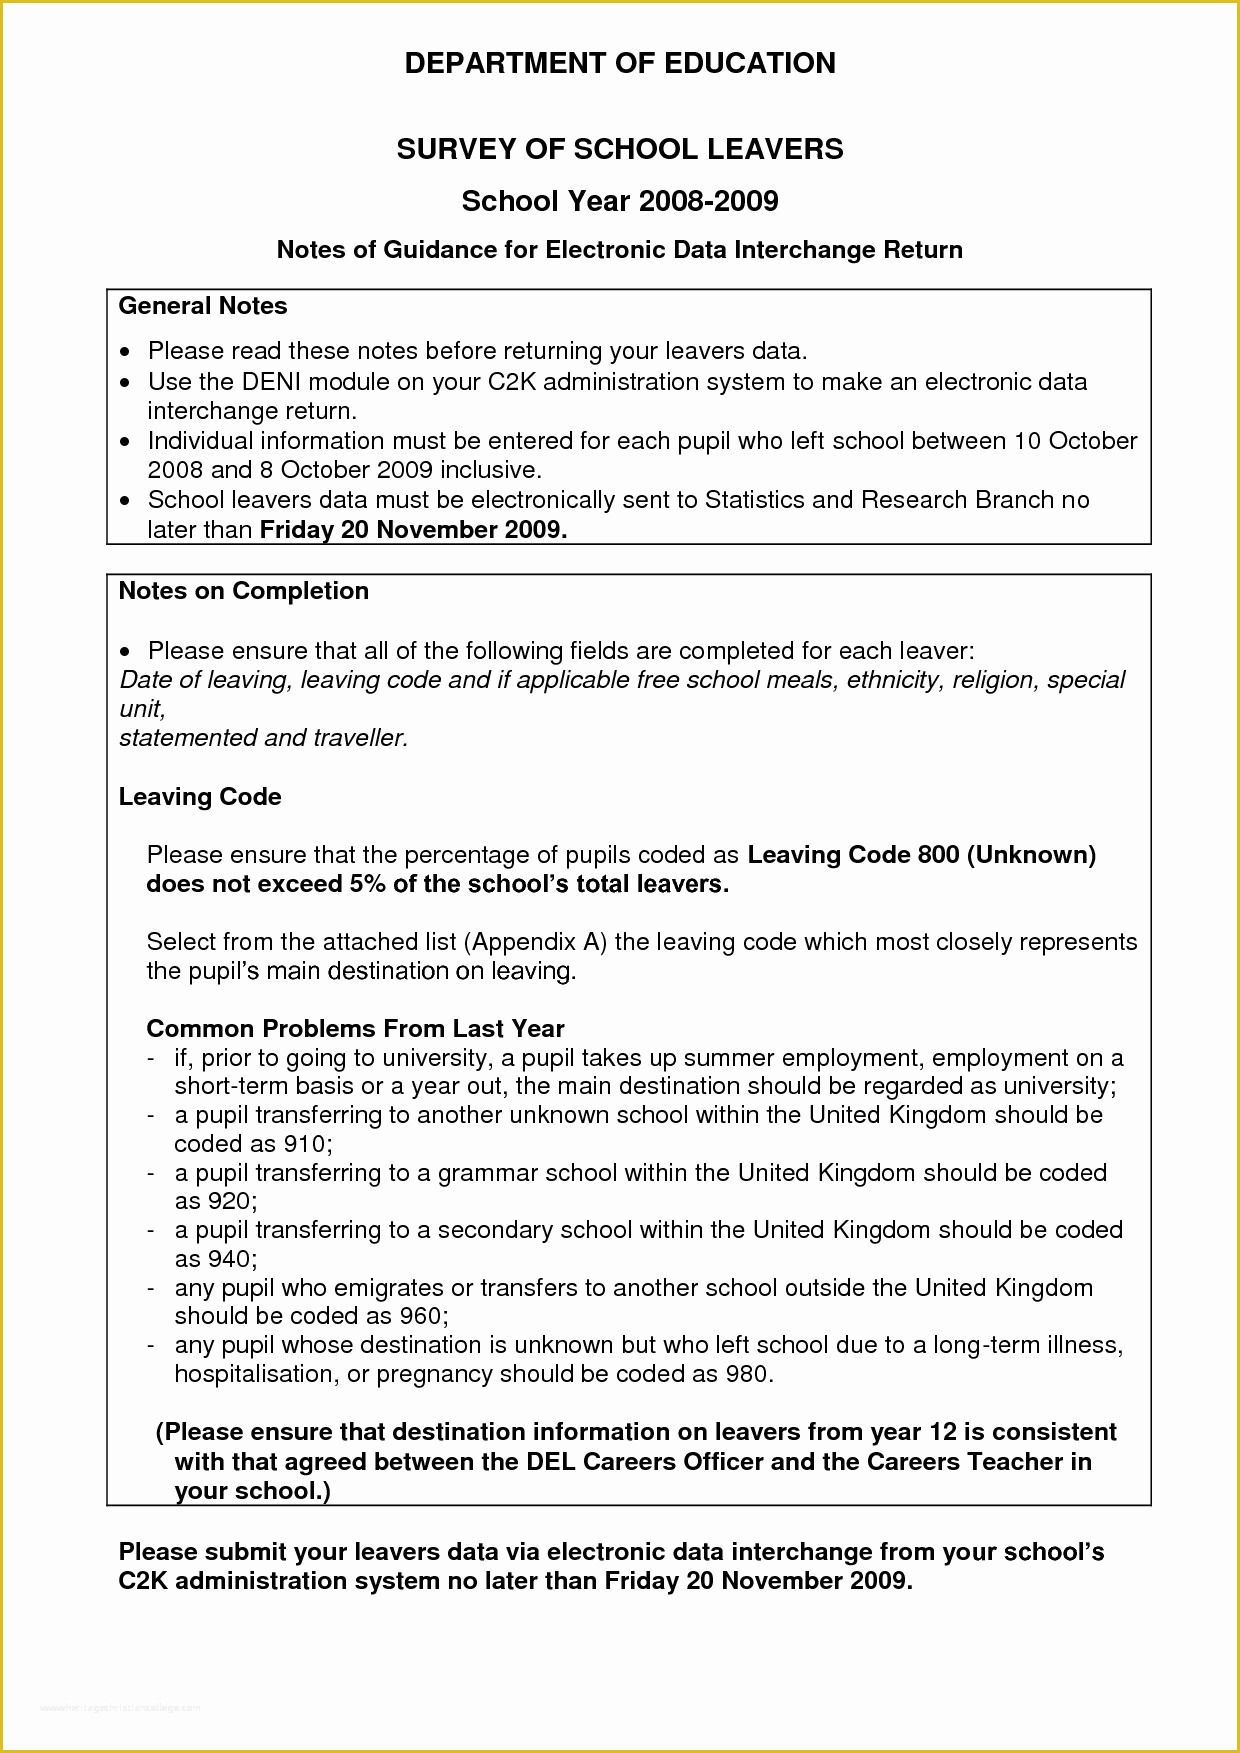 View Free Resume Templates Of Cv Templates 16 Year Olds Uk Education Essay Buy A Paper